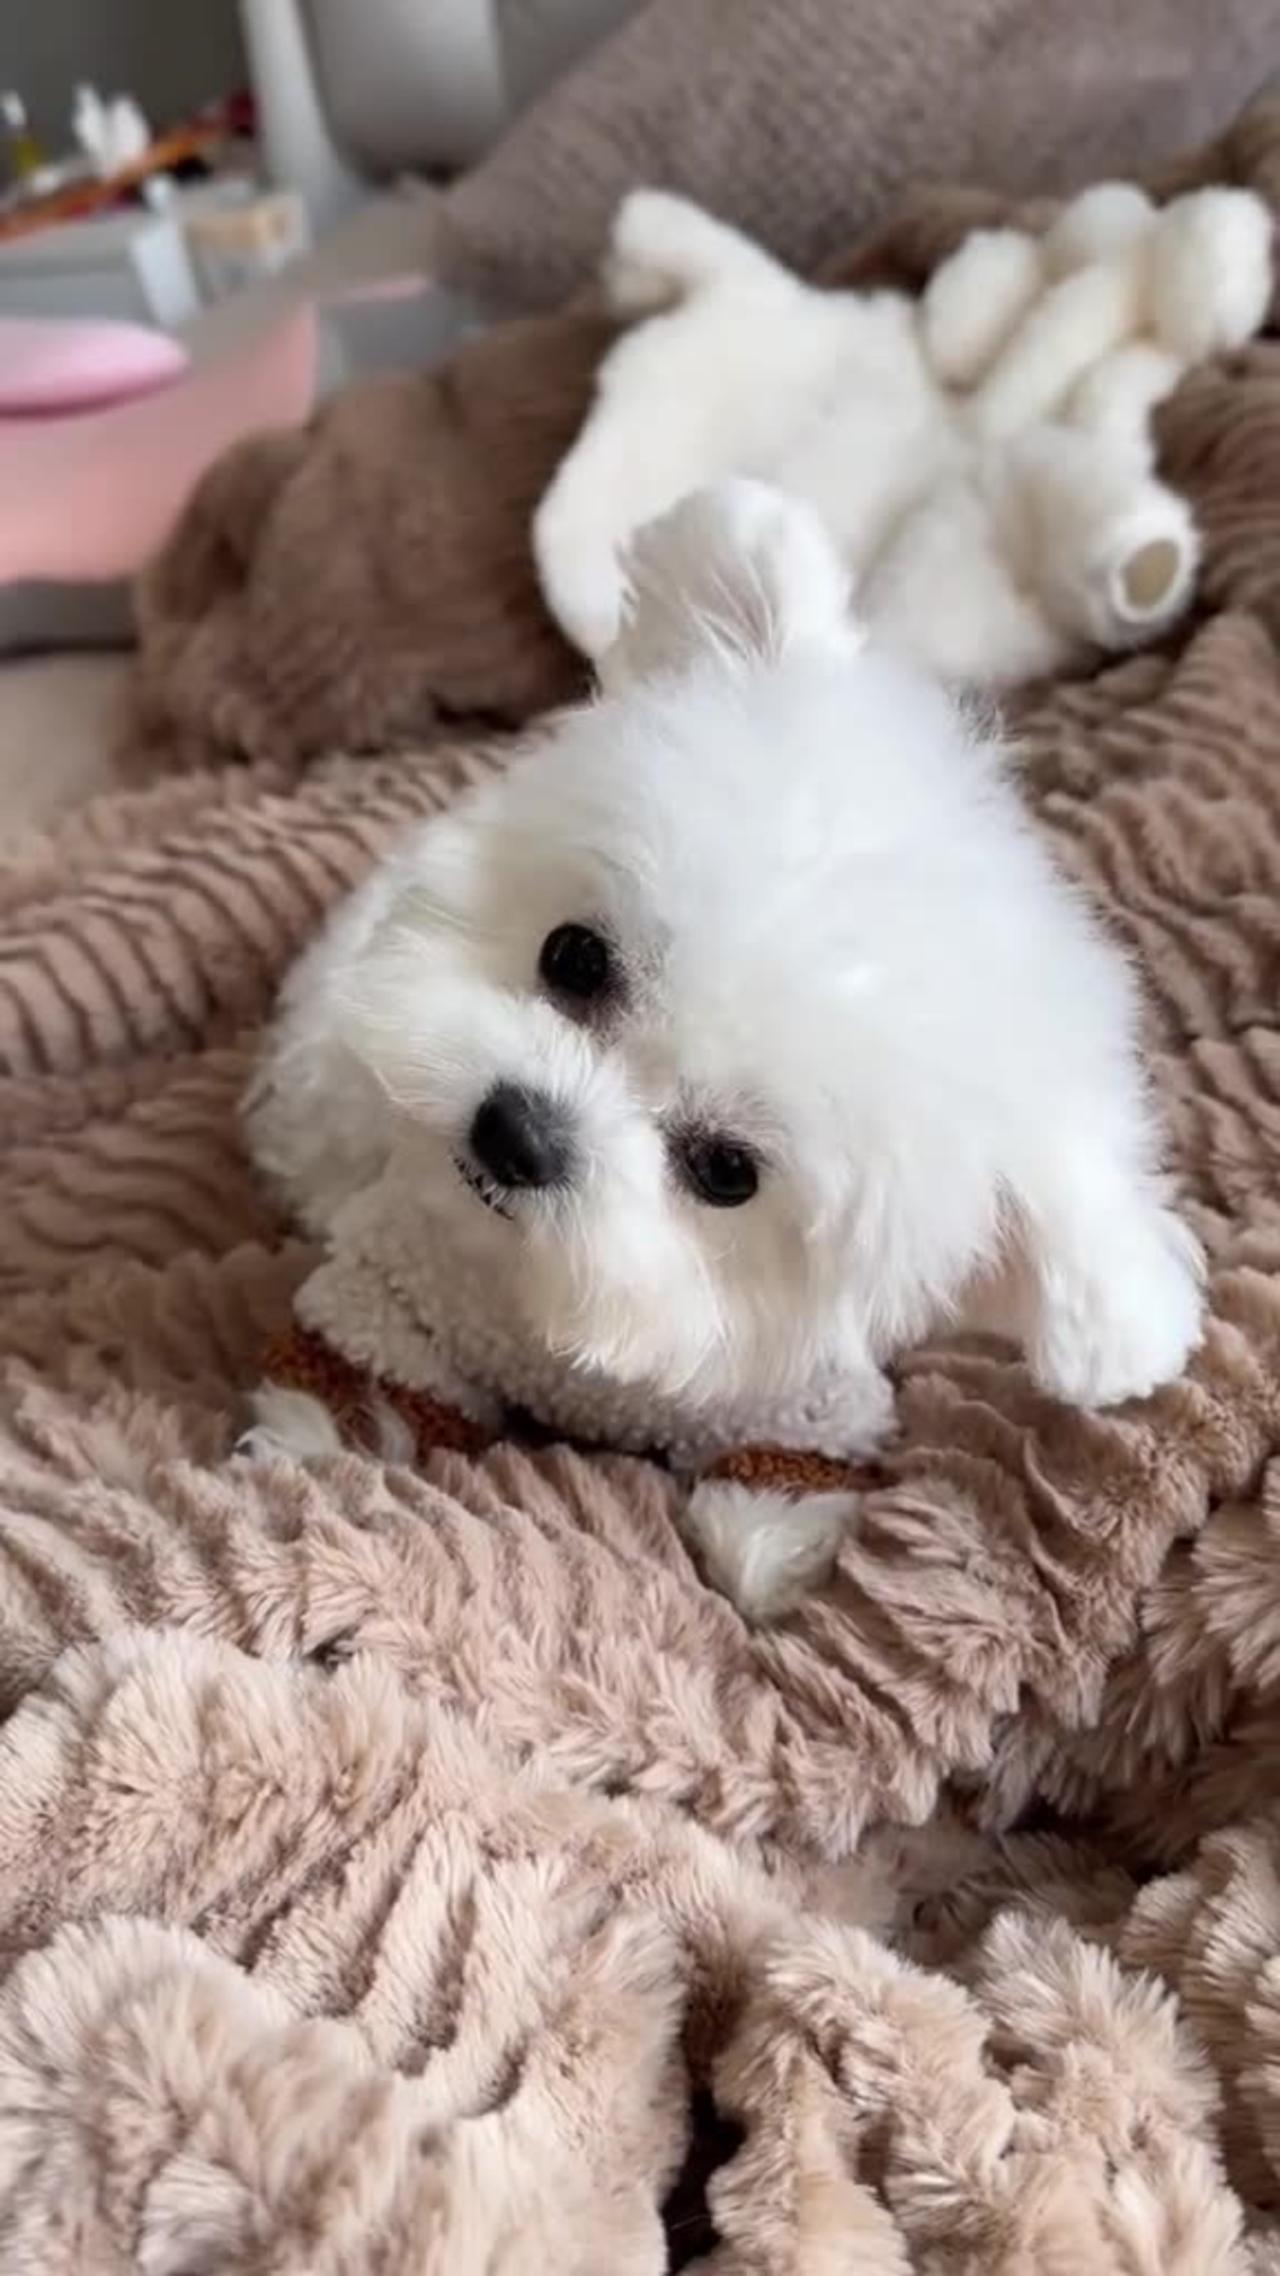 An Adorable Cute Puppy to Brighten Up Your Day